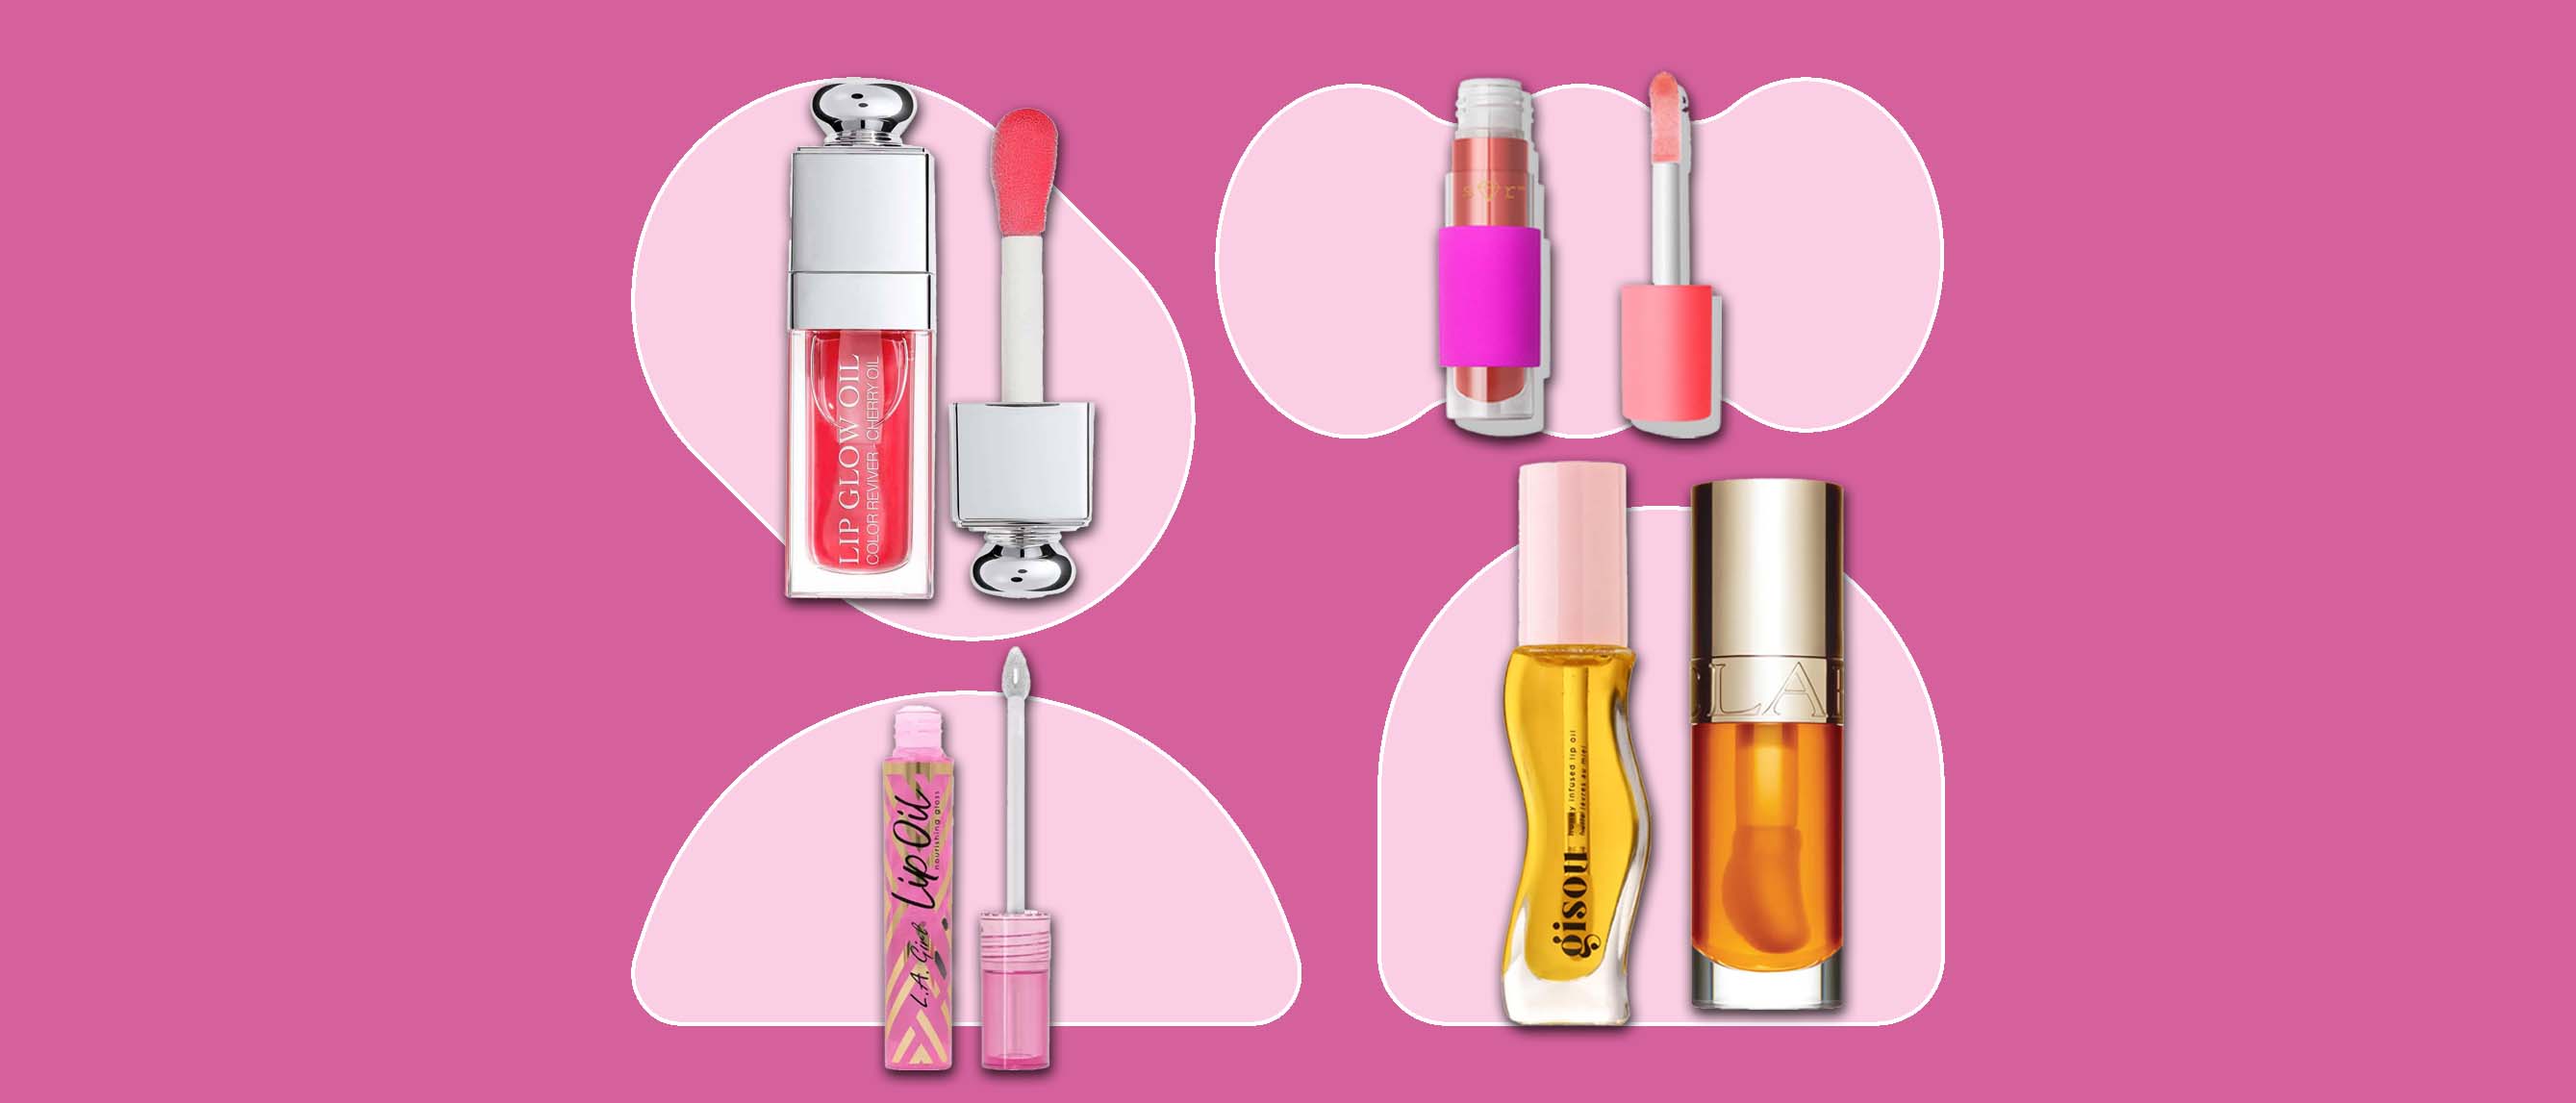 five of the best lip oils from Dior, LA girl, gisoi, Clarins and Tarte